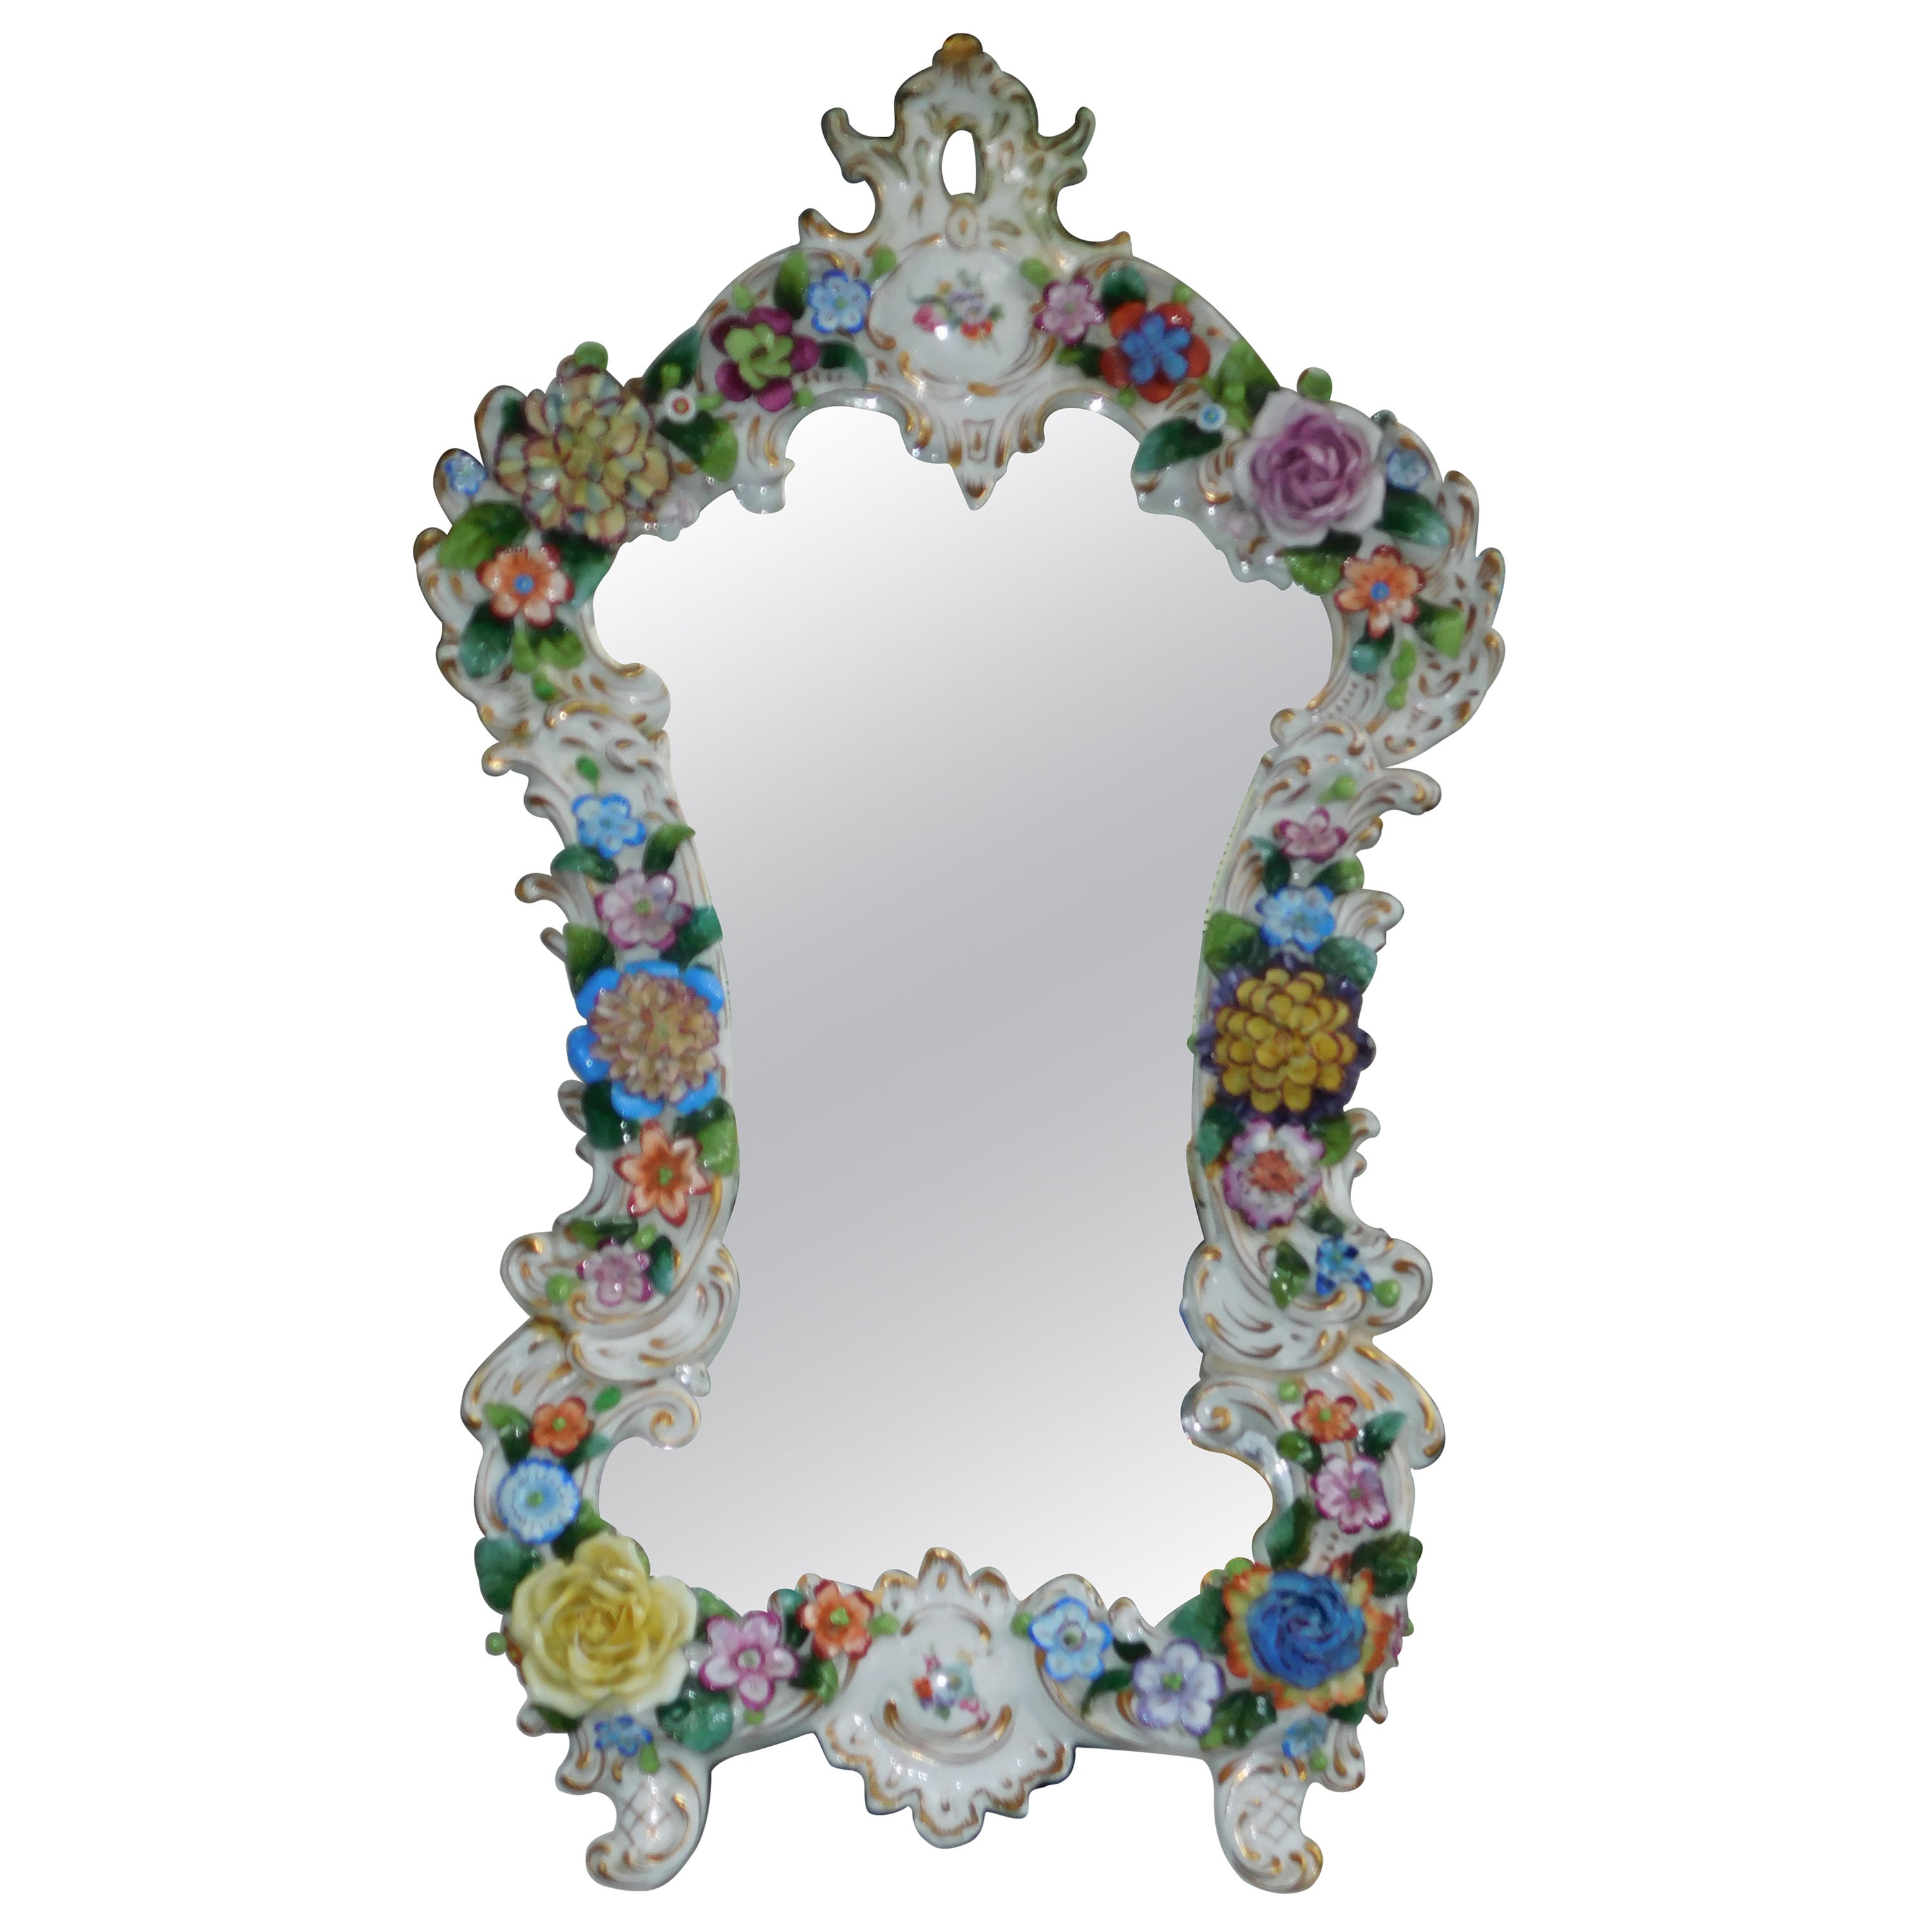 German Dresden Porcelain Serpentine Vibrant Foliage Wall Mirror, Signed, C 1870 For Sale